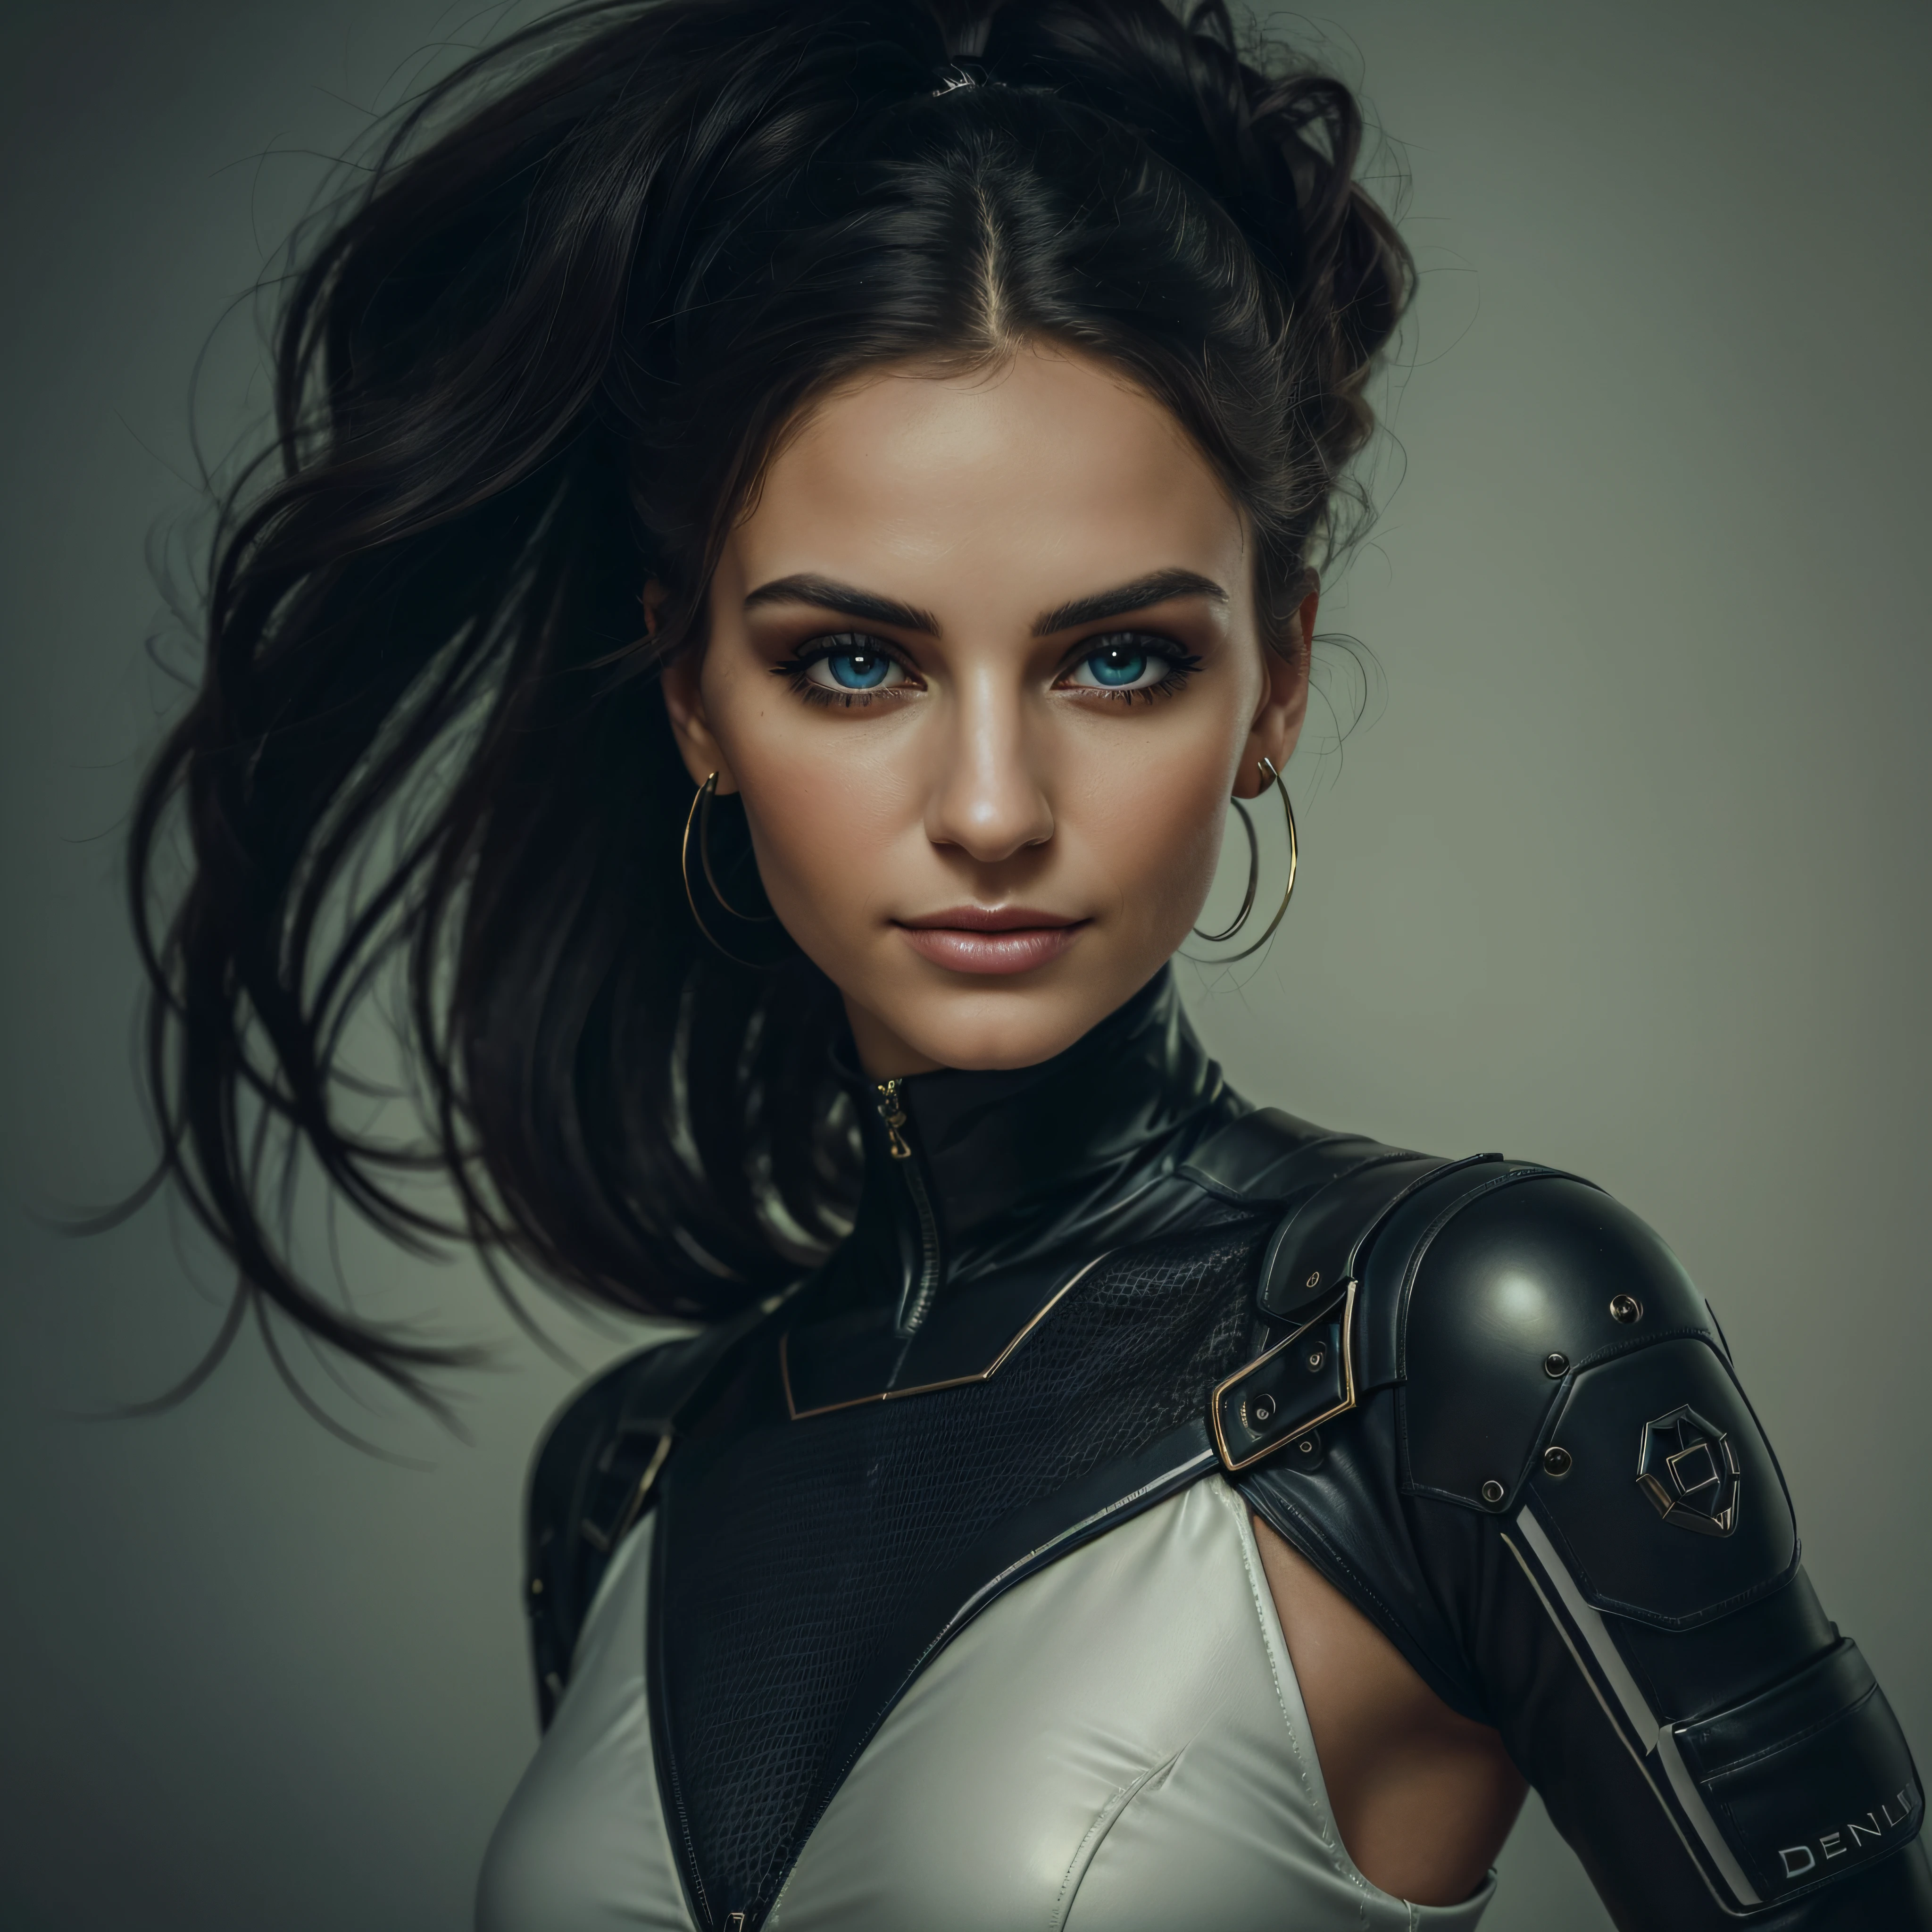 (wide shot), (futuristic hexagonal fashion style, deus ex aesthetic), (authentic expressive eyes: 1.2), An exquisite portrait of a Scandinavian woman (with pale white skin: 1.3) and dark makeup, the photograph captured in stunning 8k resolution and raw format to preserve the highest quality of details. The woman's beauty is undeniable. She wears futuristic angular clothing that complements her soft features, (her eyes are portrayed with meticulous attention to detail: 1.3), showcasing the captivating depth within her eyes. The photograph is taken with a lens that emphasizes the gentle smile in her eyes, and the backdrop is a dark studio setting that enhances the muted colours of the scene. The lighting and shadows are expertly crafted to bring out the richness of her skin tone and the subtle nuances of her features. Her pure black hair, with its distinct hue, adds a touch of contrast against her white skin. The interior setting adds a sense of intimacy. The overall composition captures her essence with authenticity and grace, creating a portrait that celebrates her heritage and beauty. Photography utilizing the best techniques for shadow and lighting, to create a mesmerizing portrayal that transcends the visual, slightly tilted head, (extreme eye details: 1.4)